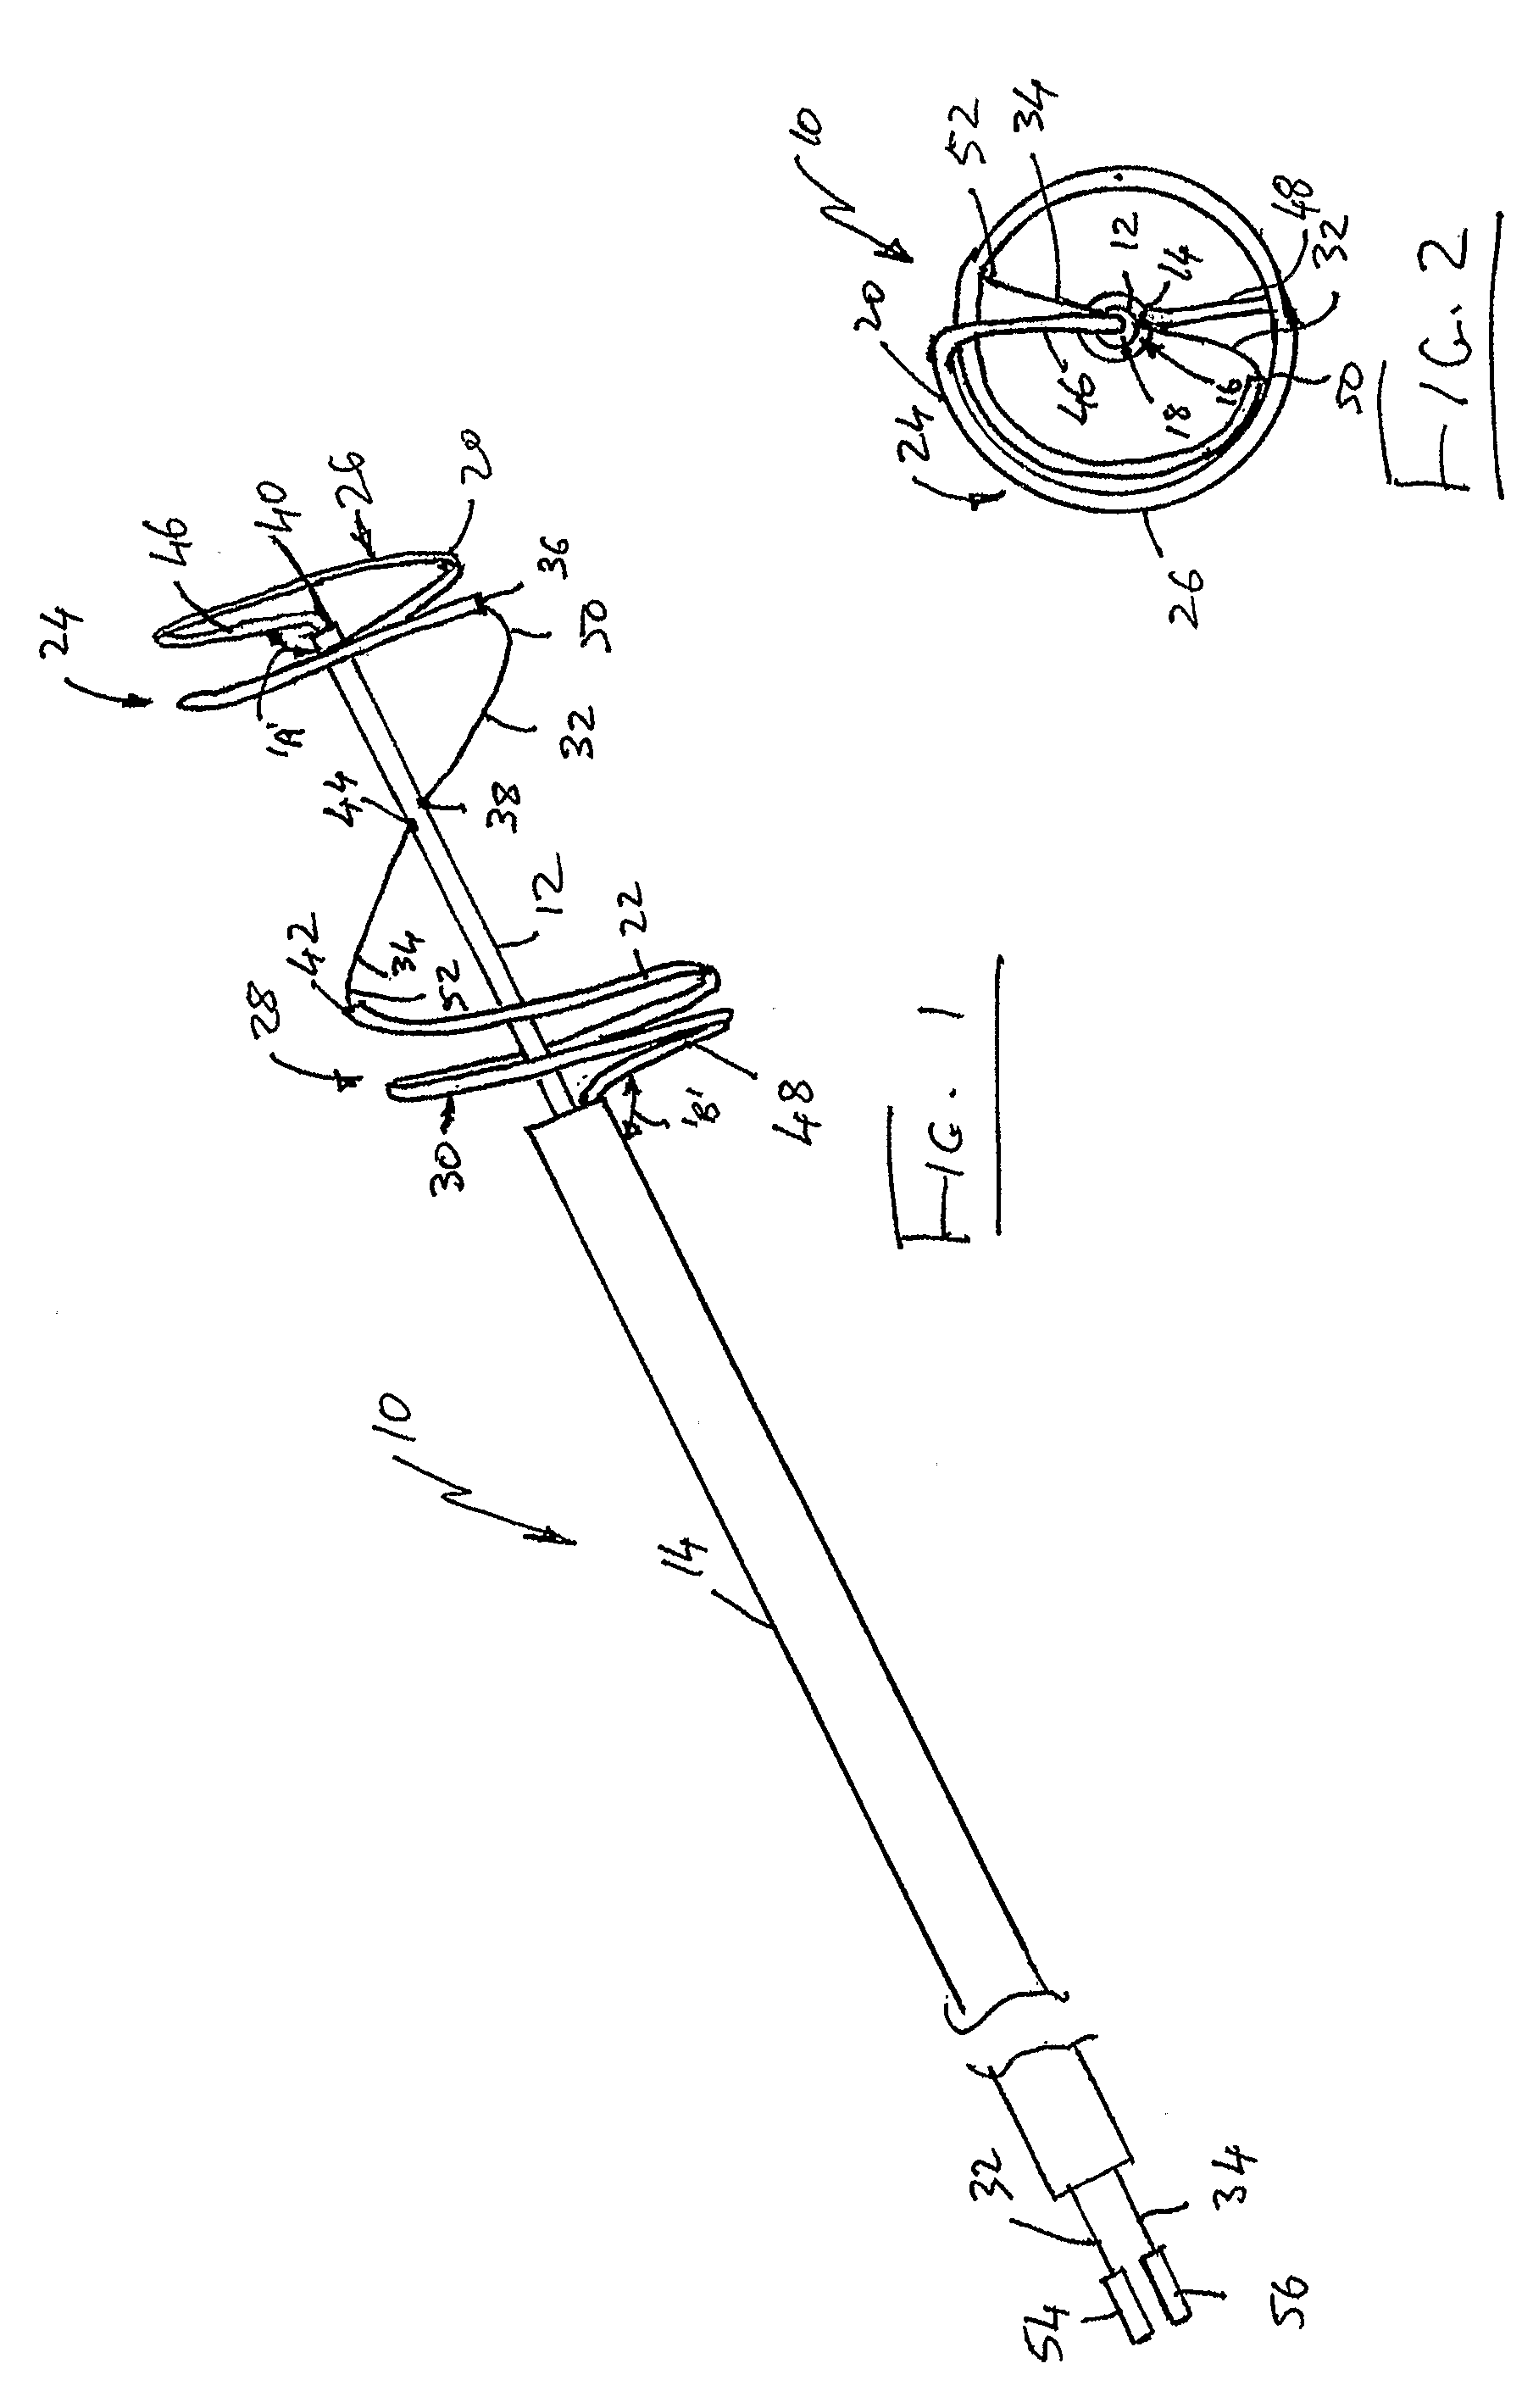 Catheter Assembly With an Adjustable Loop